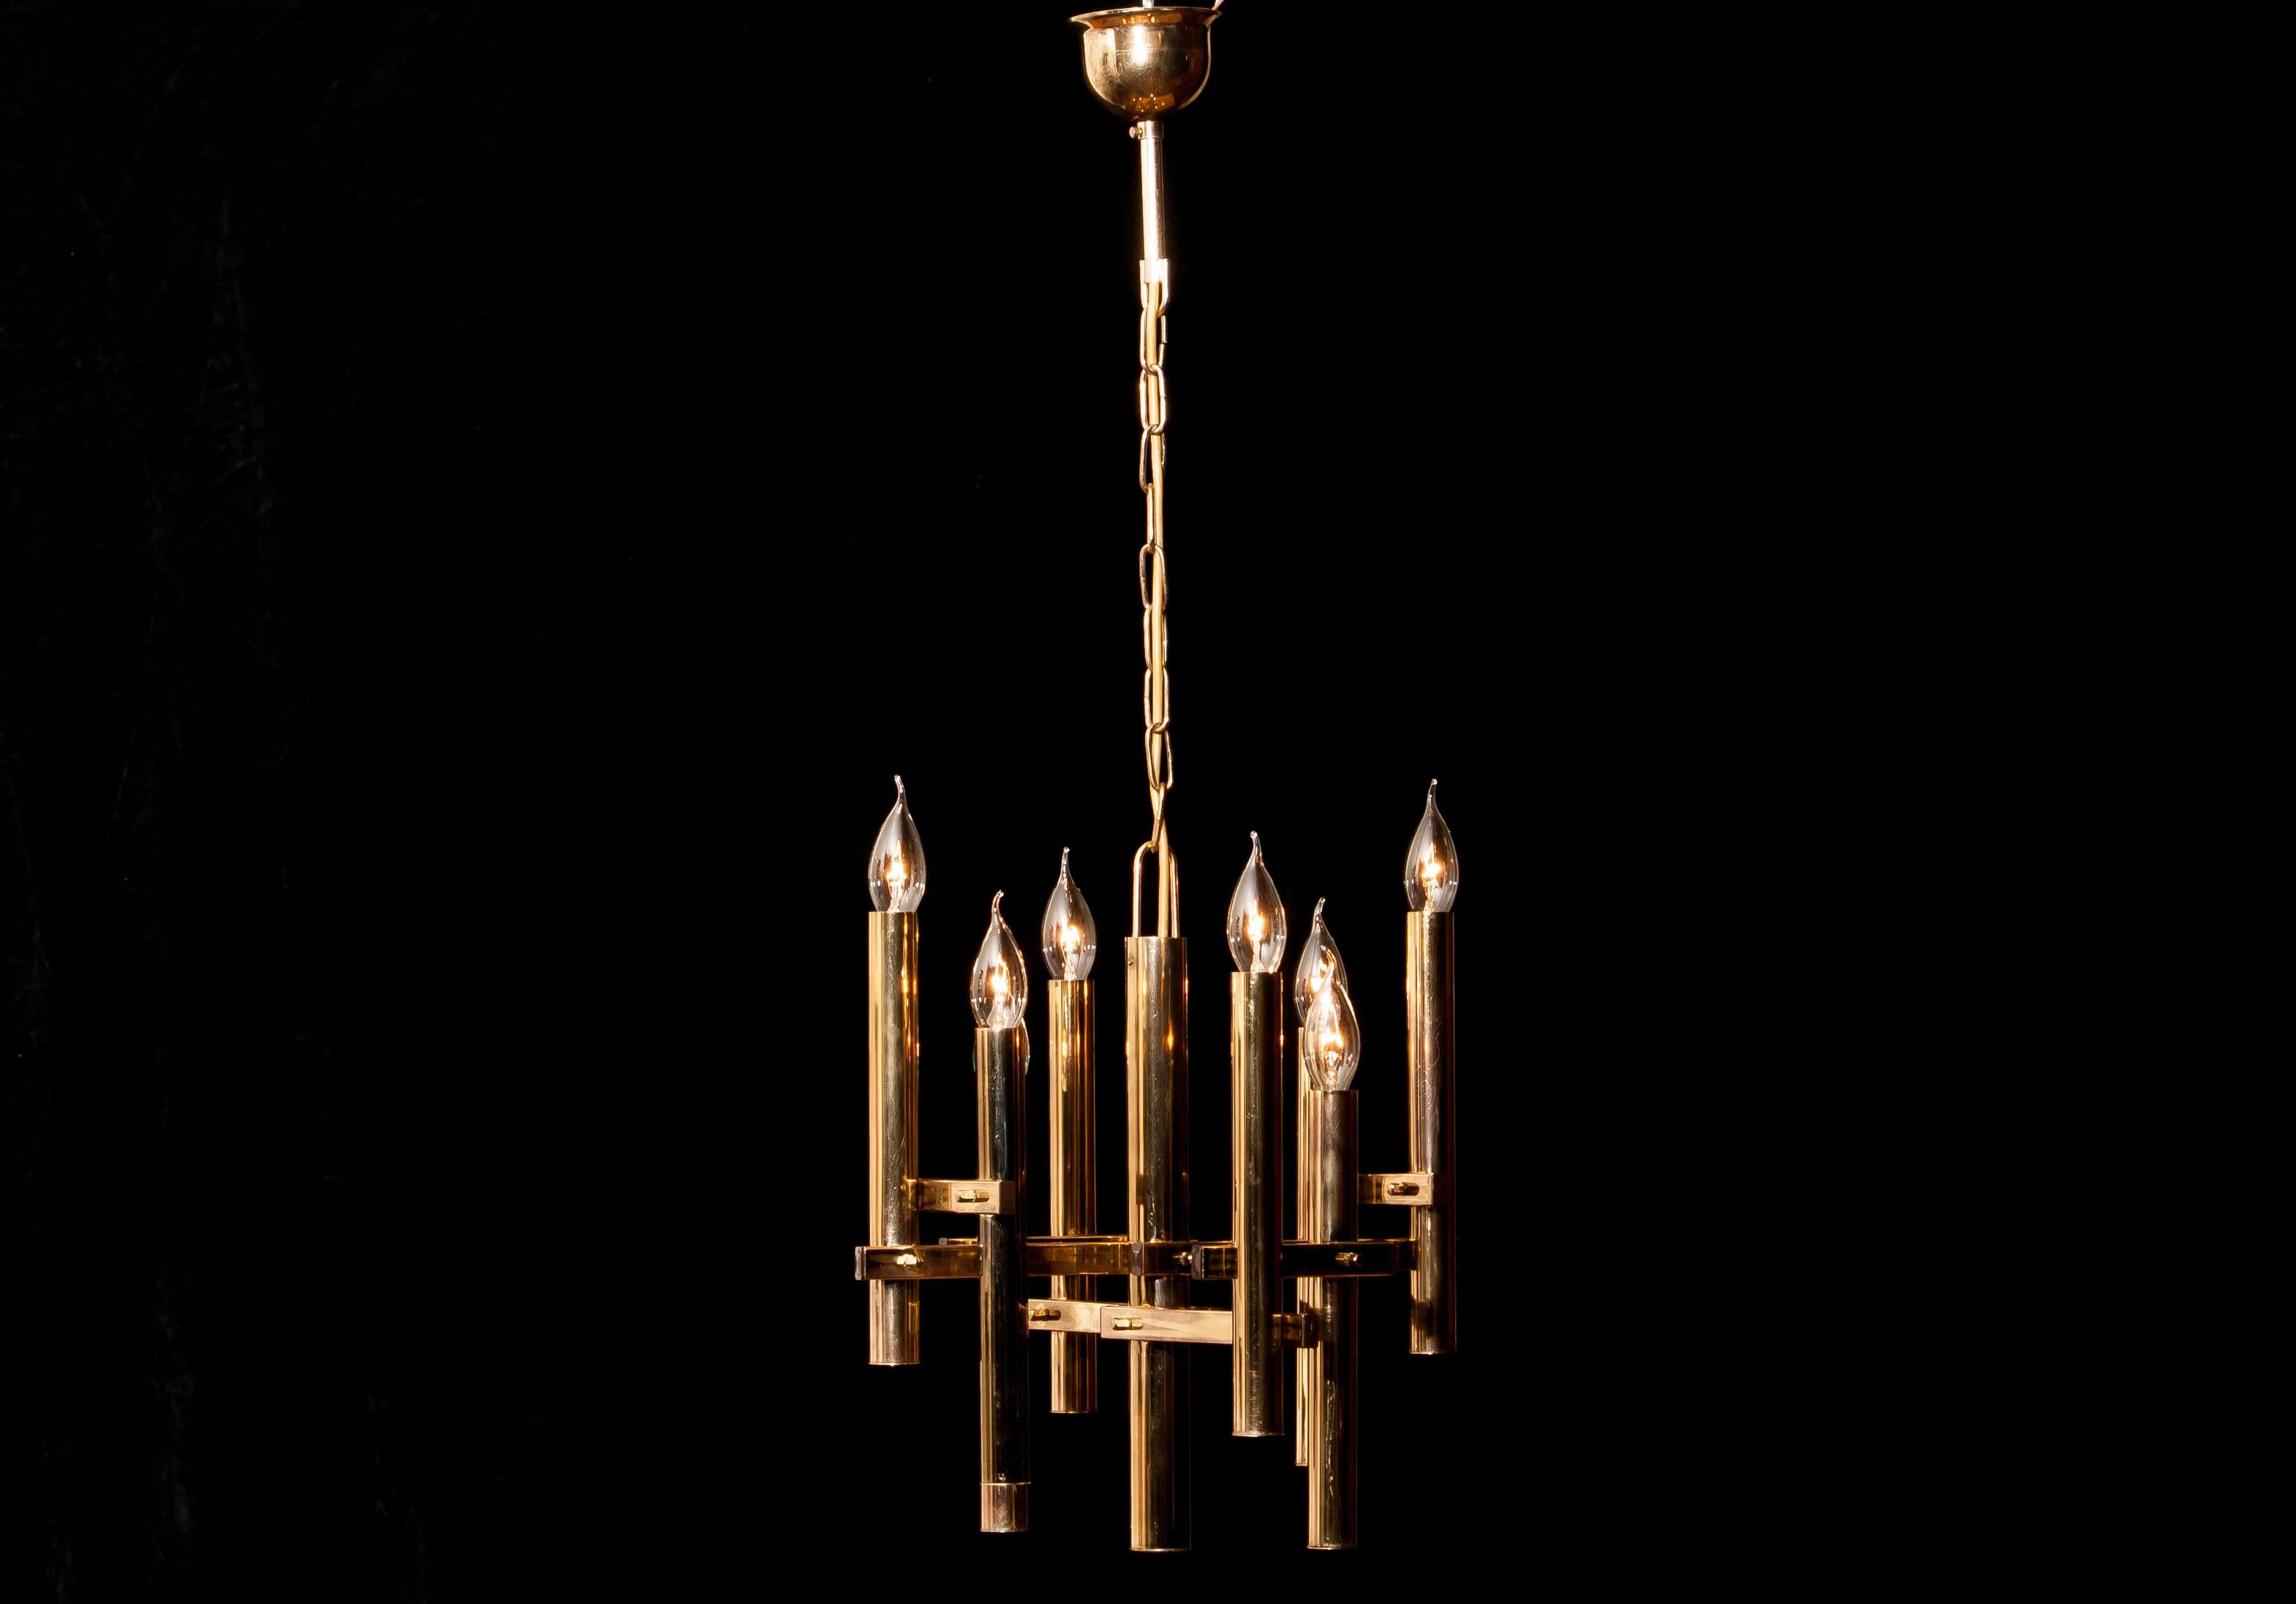 Beautiful brass pendant by Gaetano Sciolari Italy.
This wonderful lamp has eight fittings.
The height is adjustable.
It is in excellent condition.
Period 1960s.
Dimensions: H 93 cm, ø 40 cm.